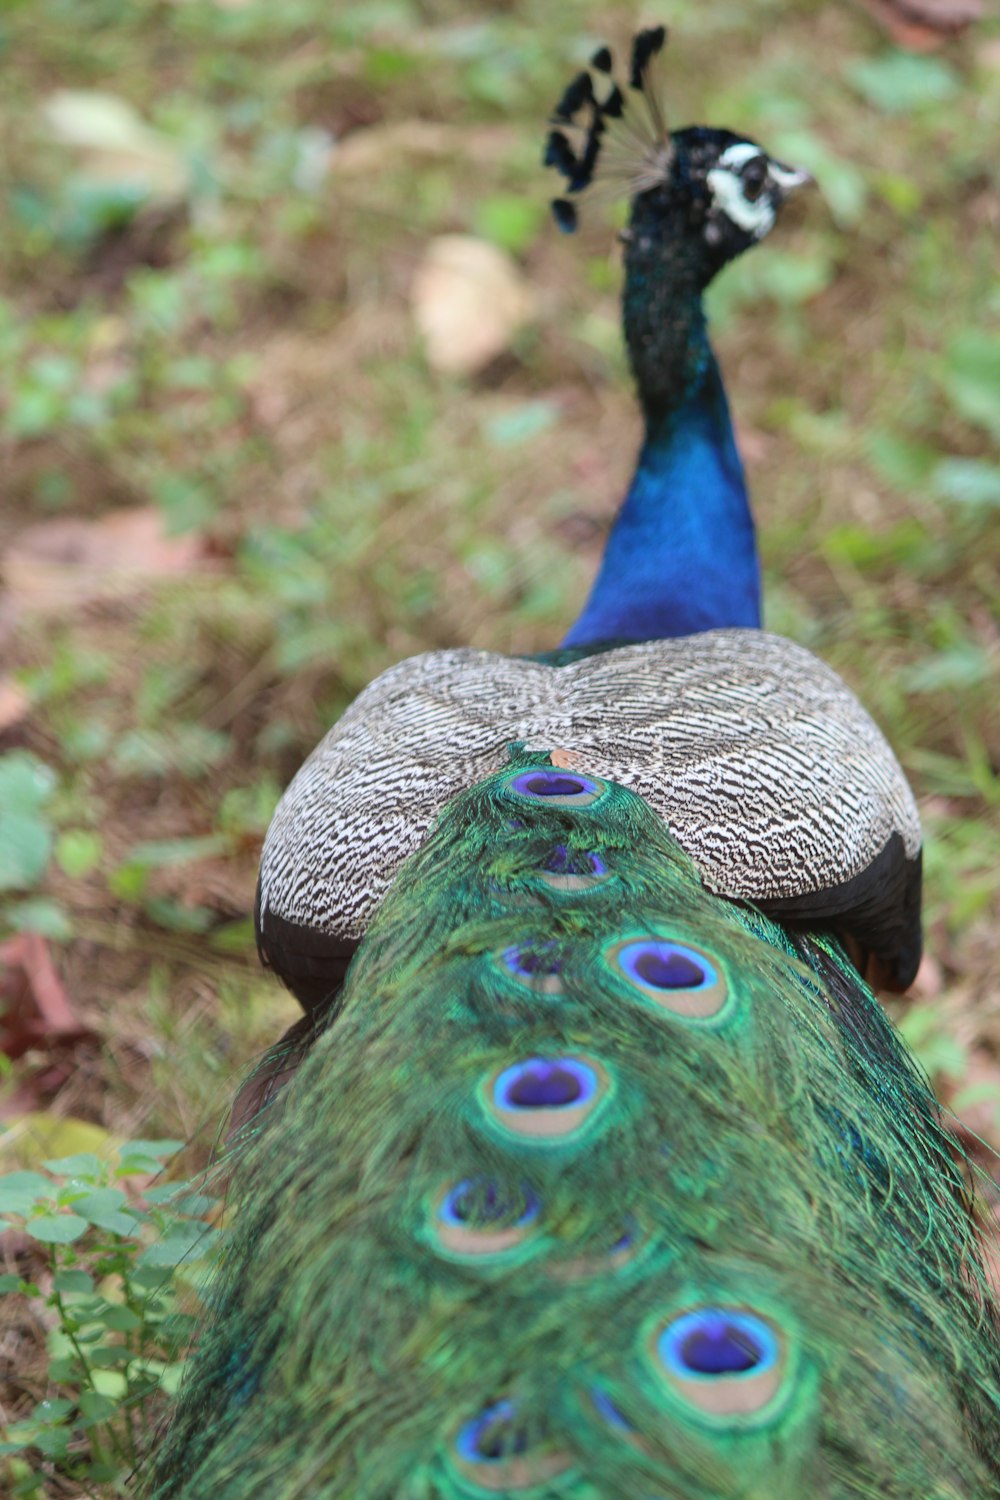 a close up of a peacock on the ground